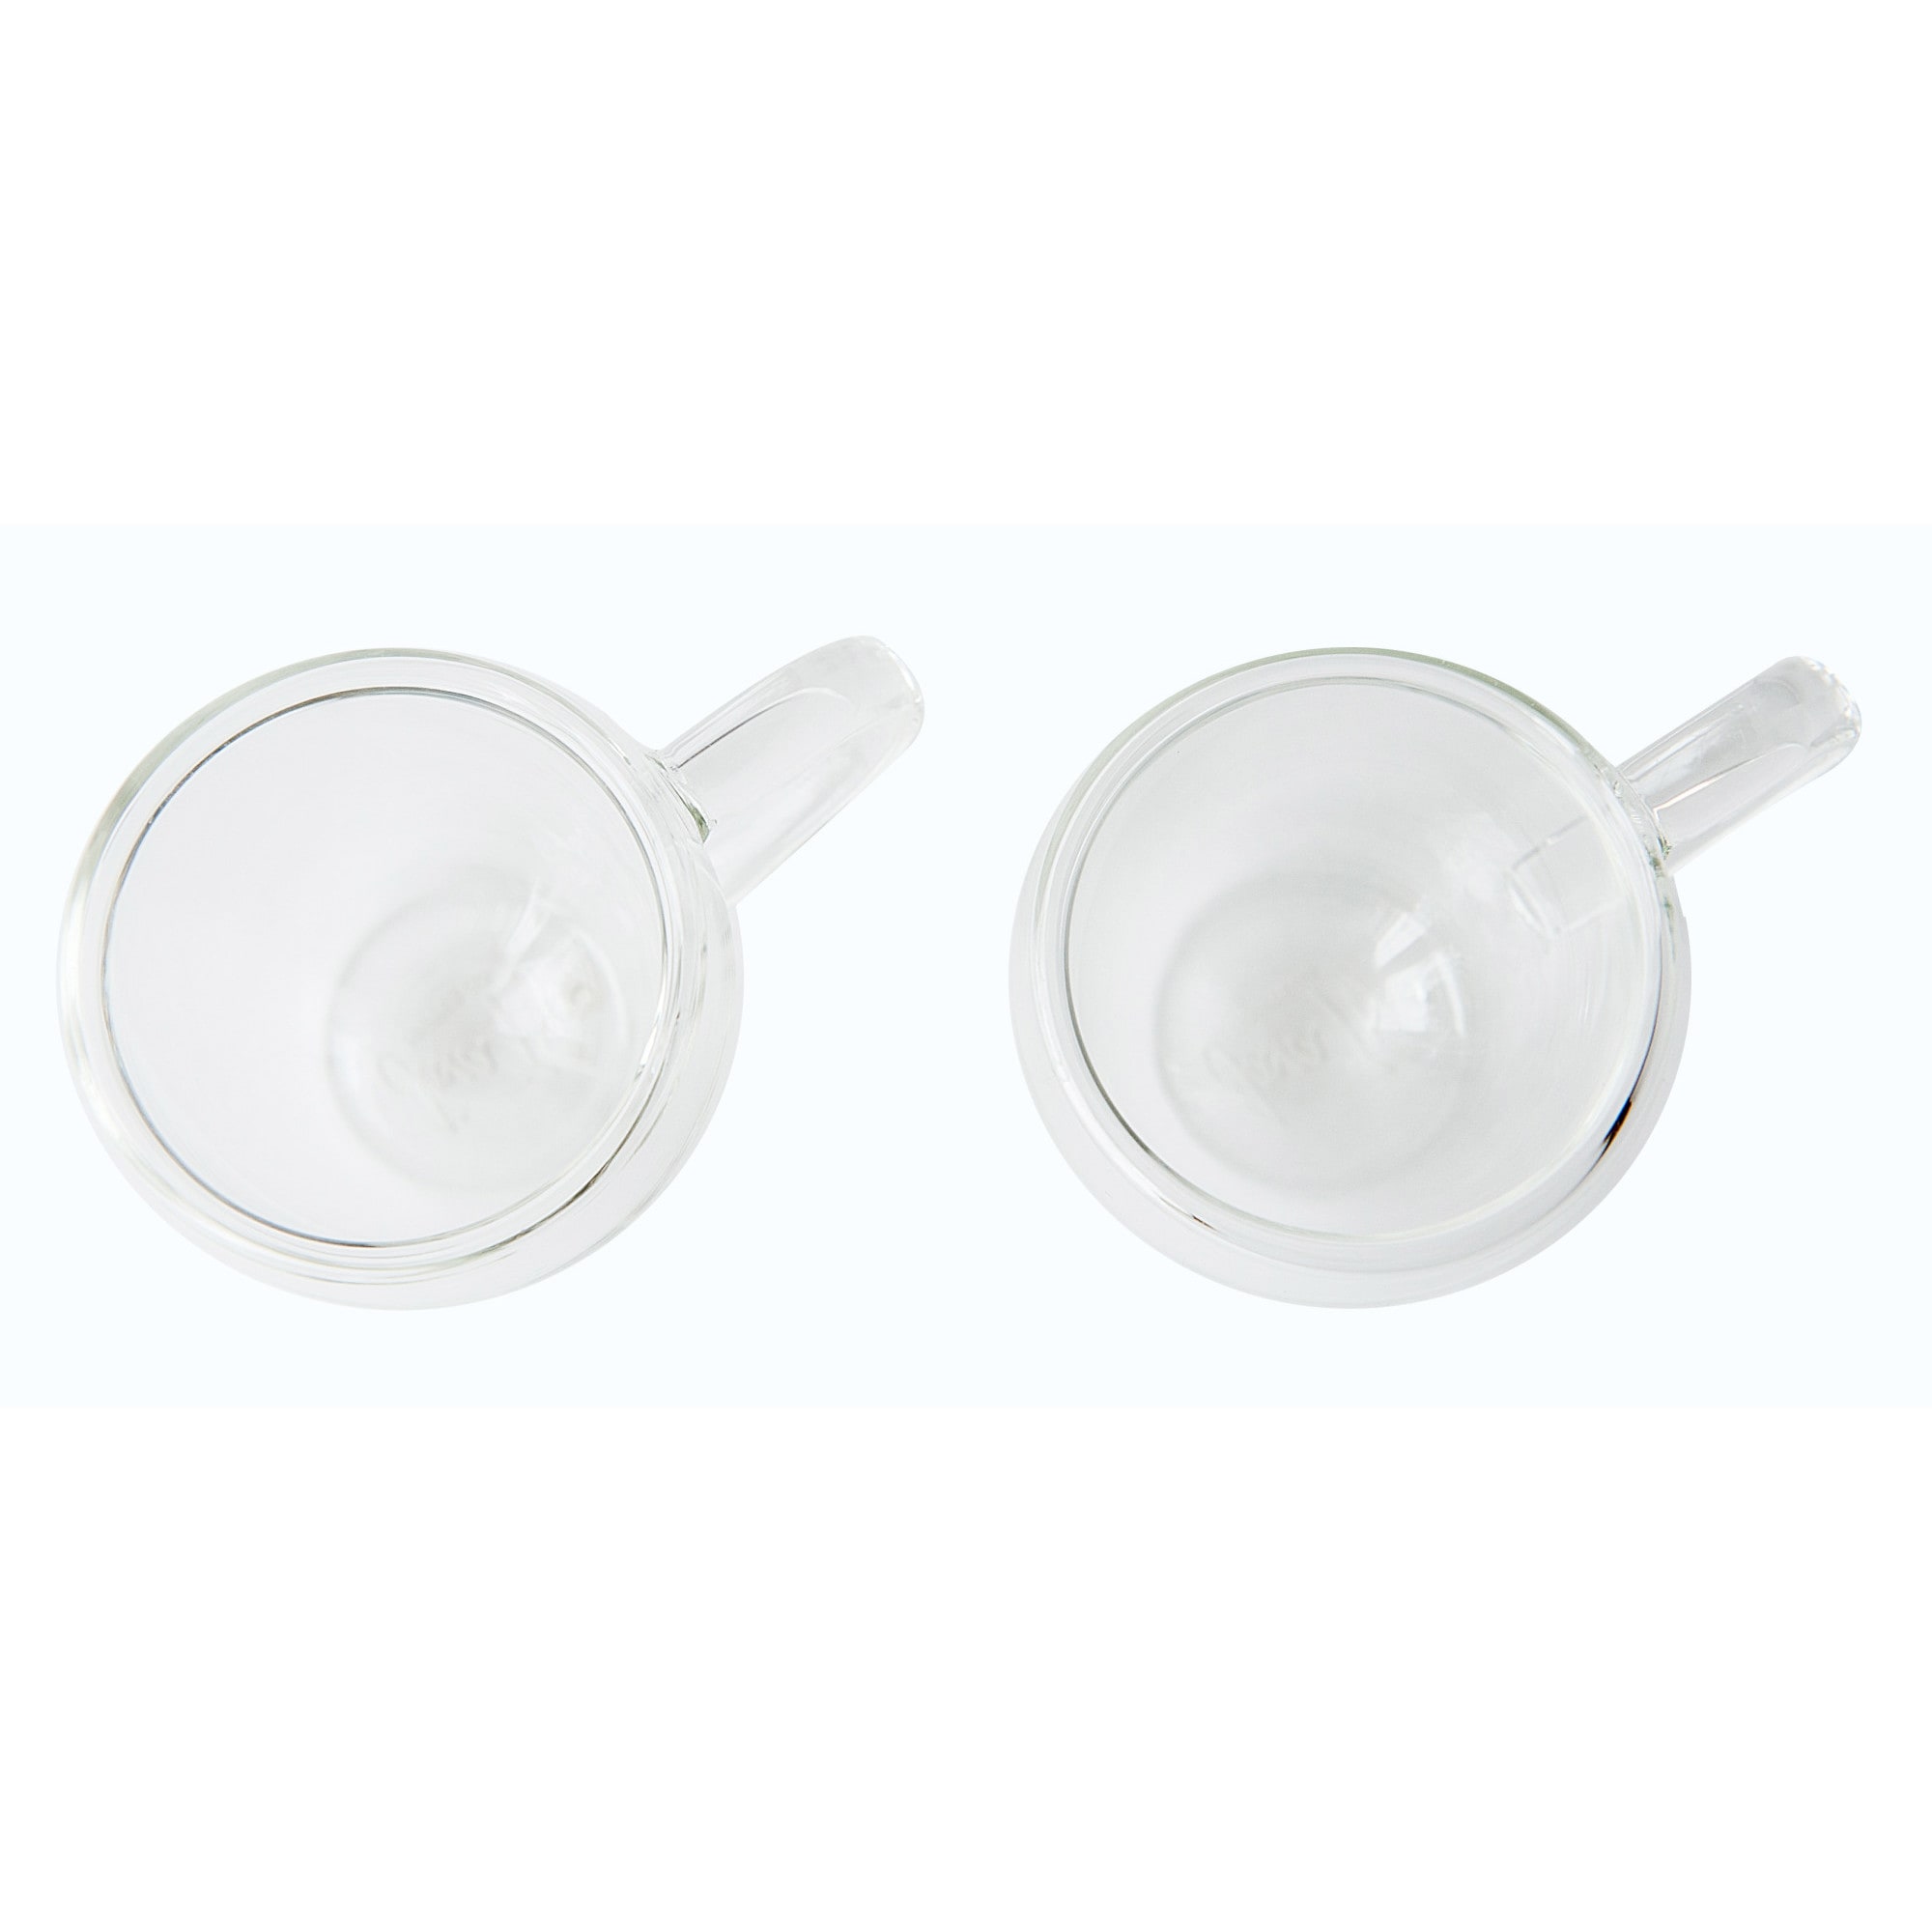 https://ak1.ostkcdn.com/images/products/19744138/Bistro-Mug-with-Handle-from-JavaFly-Double-Walled-Clear-Thermo-Glass-Cup-4oz-Set-of-4-2574ba62-e07f-493e-92aa-62cea8aad15e.jpg